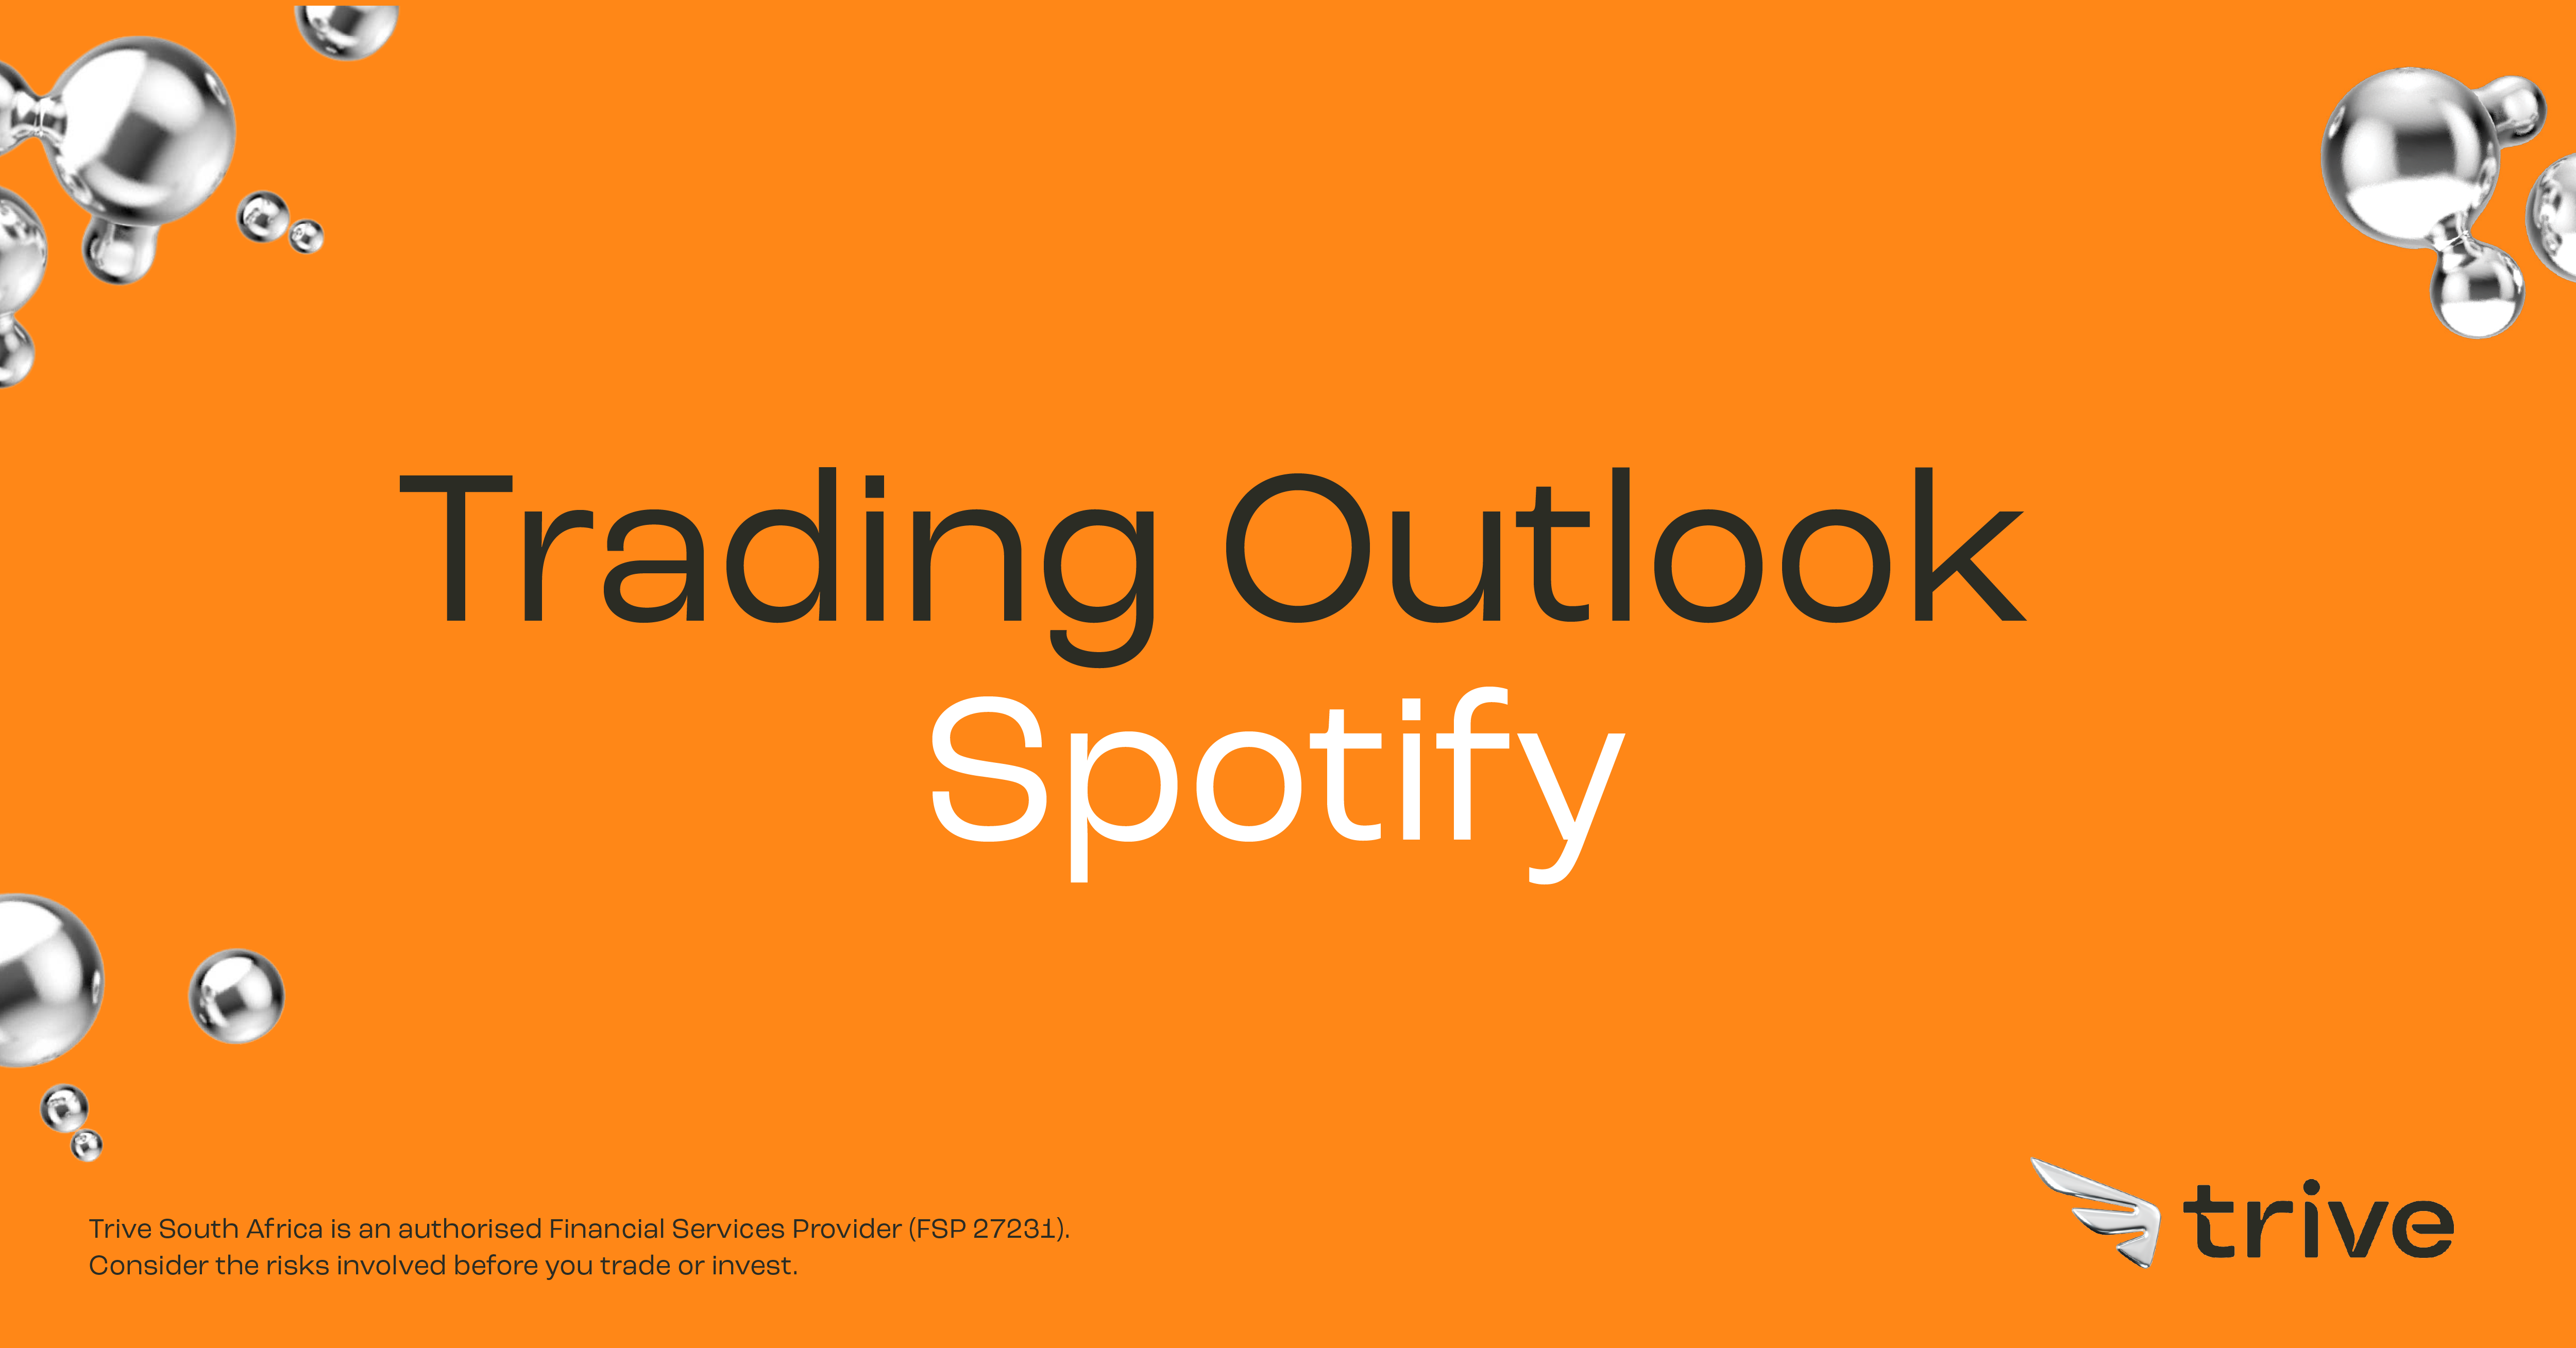 Read more about the article Spotify Shares Surge on Strong Subscription Growth